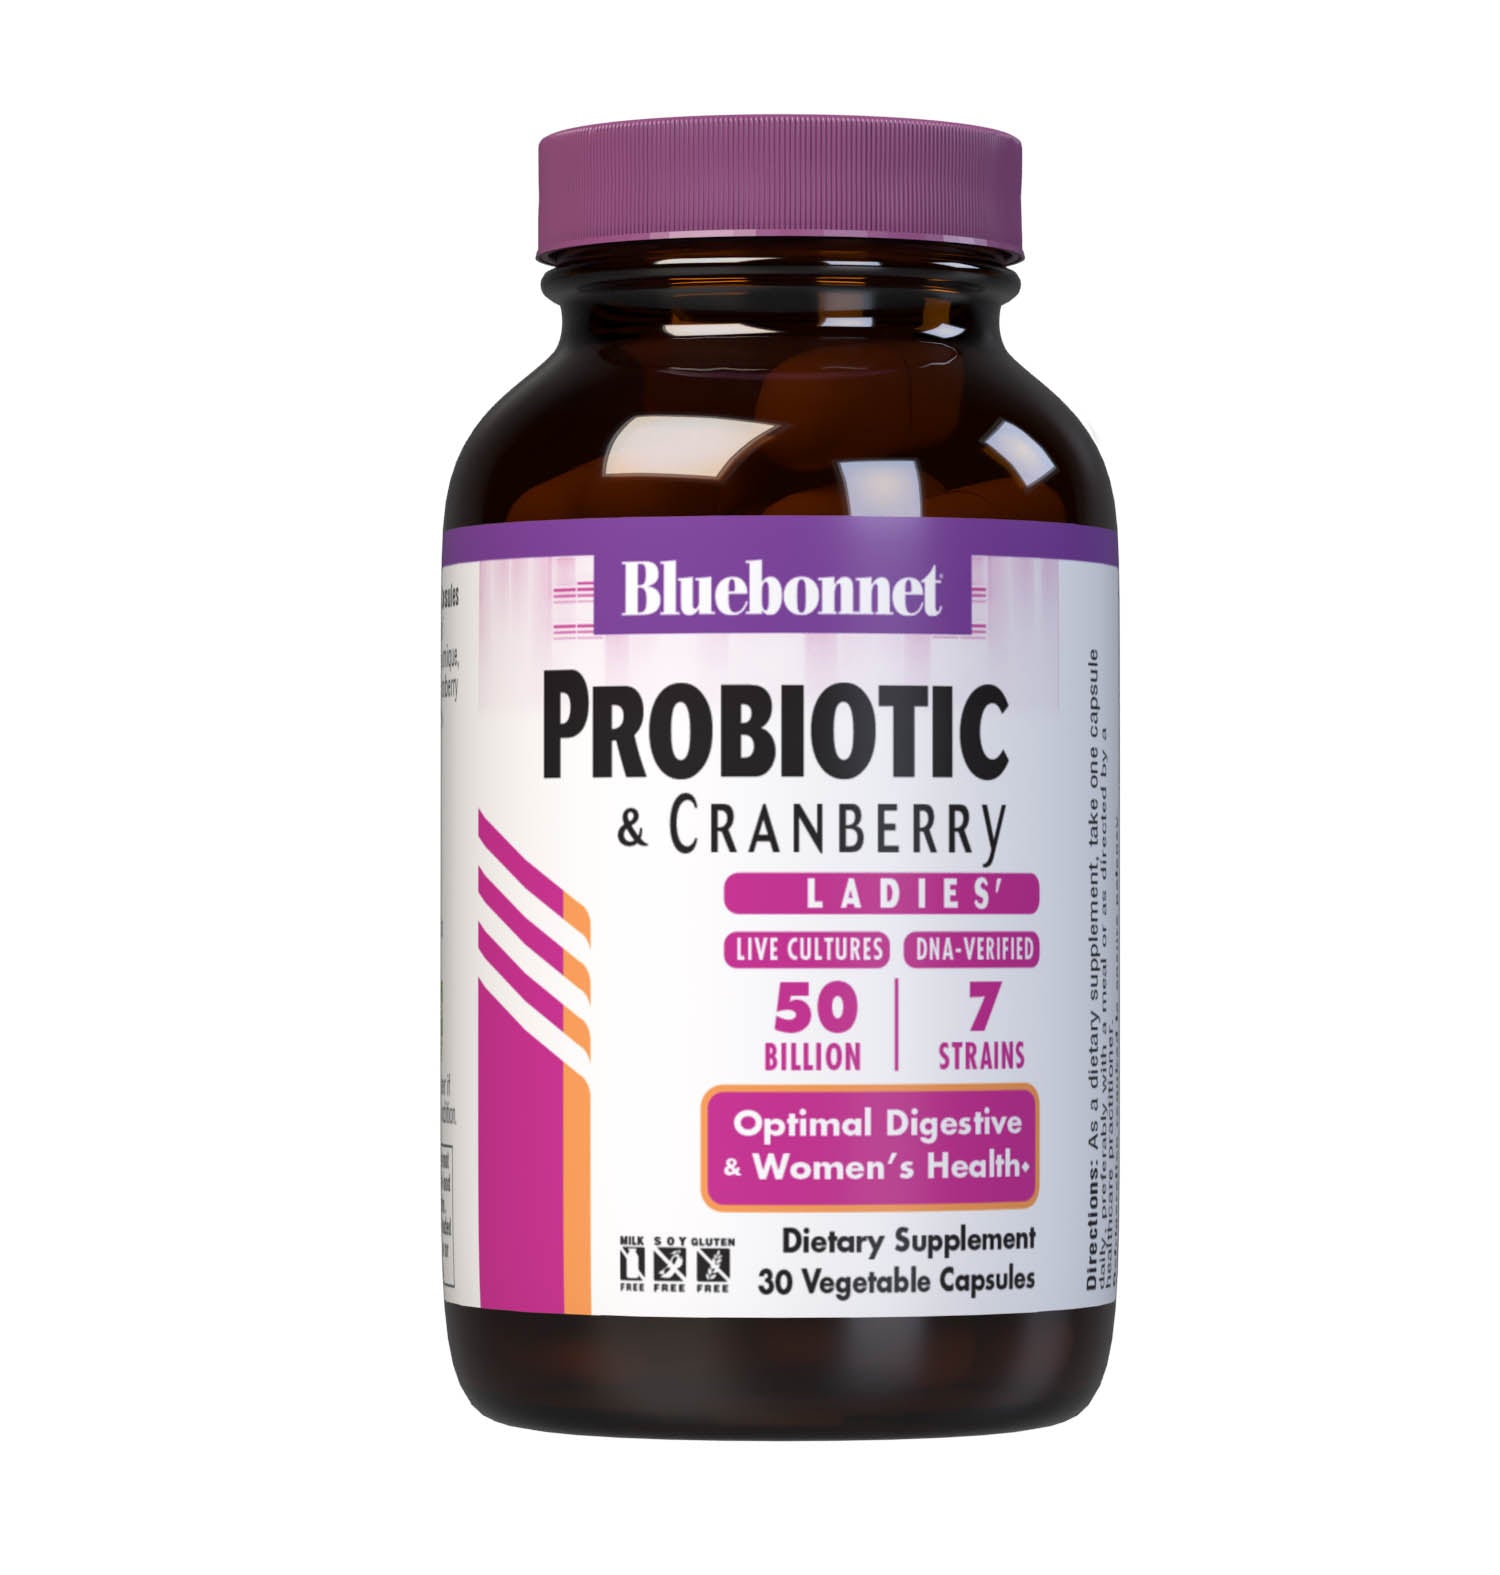 Bluebonnet’s Probiotic & Cranberry 30 Vegetable Capsules are formulated with 50 billion viable cultures from 7 DNA-verified, scientifically supported strains. This unique, science-based probiotic formula is infused with cranberry fruit extract to further nurture urinary tract health. #size_30 count